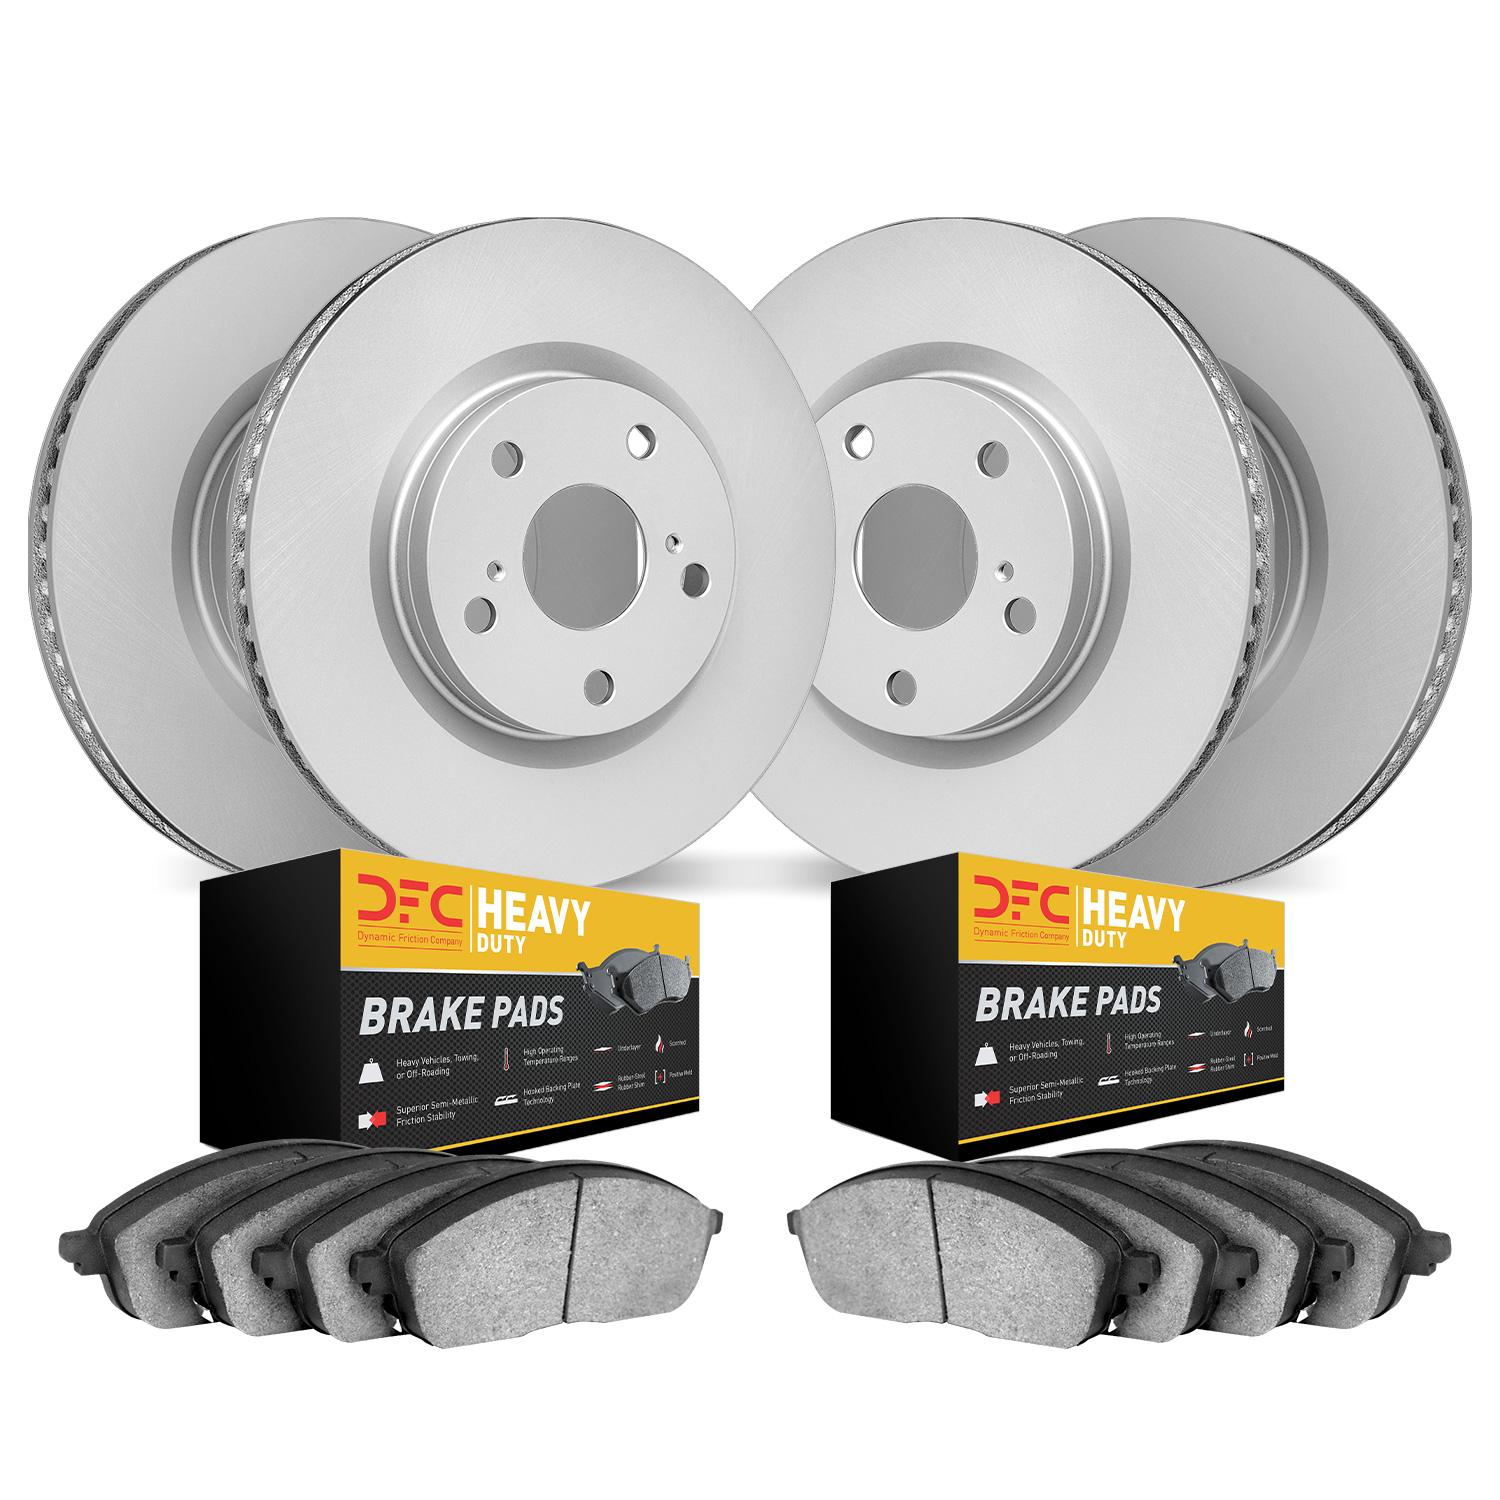 4204-76006 Geospec Brake Rotors w/Heavy-Duty Brake Pads Kit, Fits Select Lexus/Toyota/Scion, Position: Front and Rear